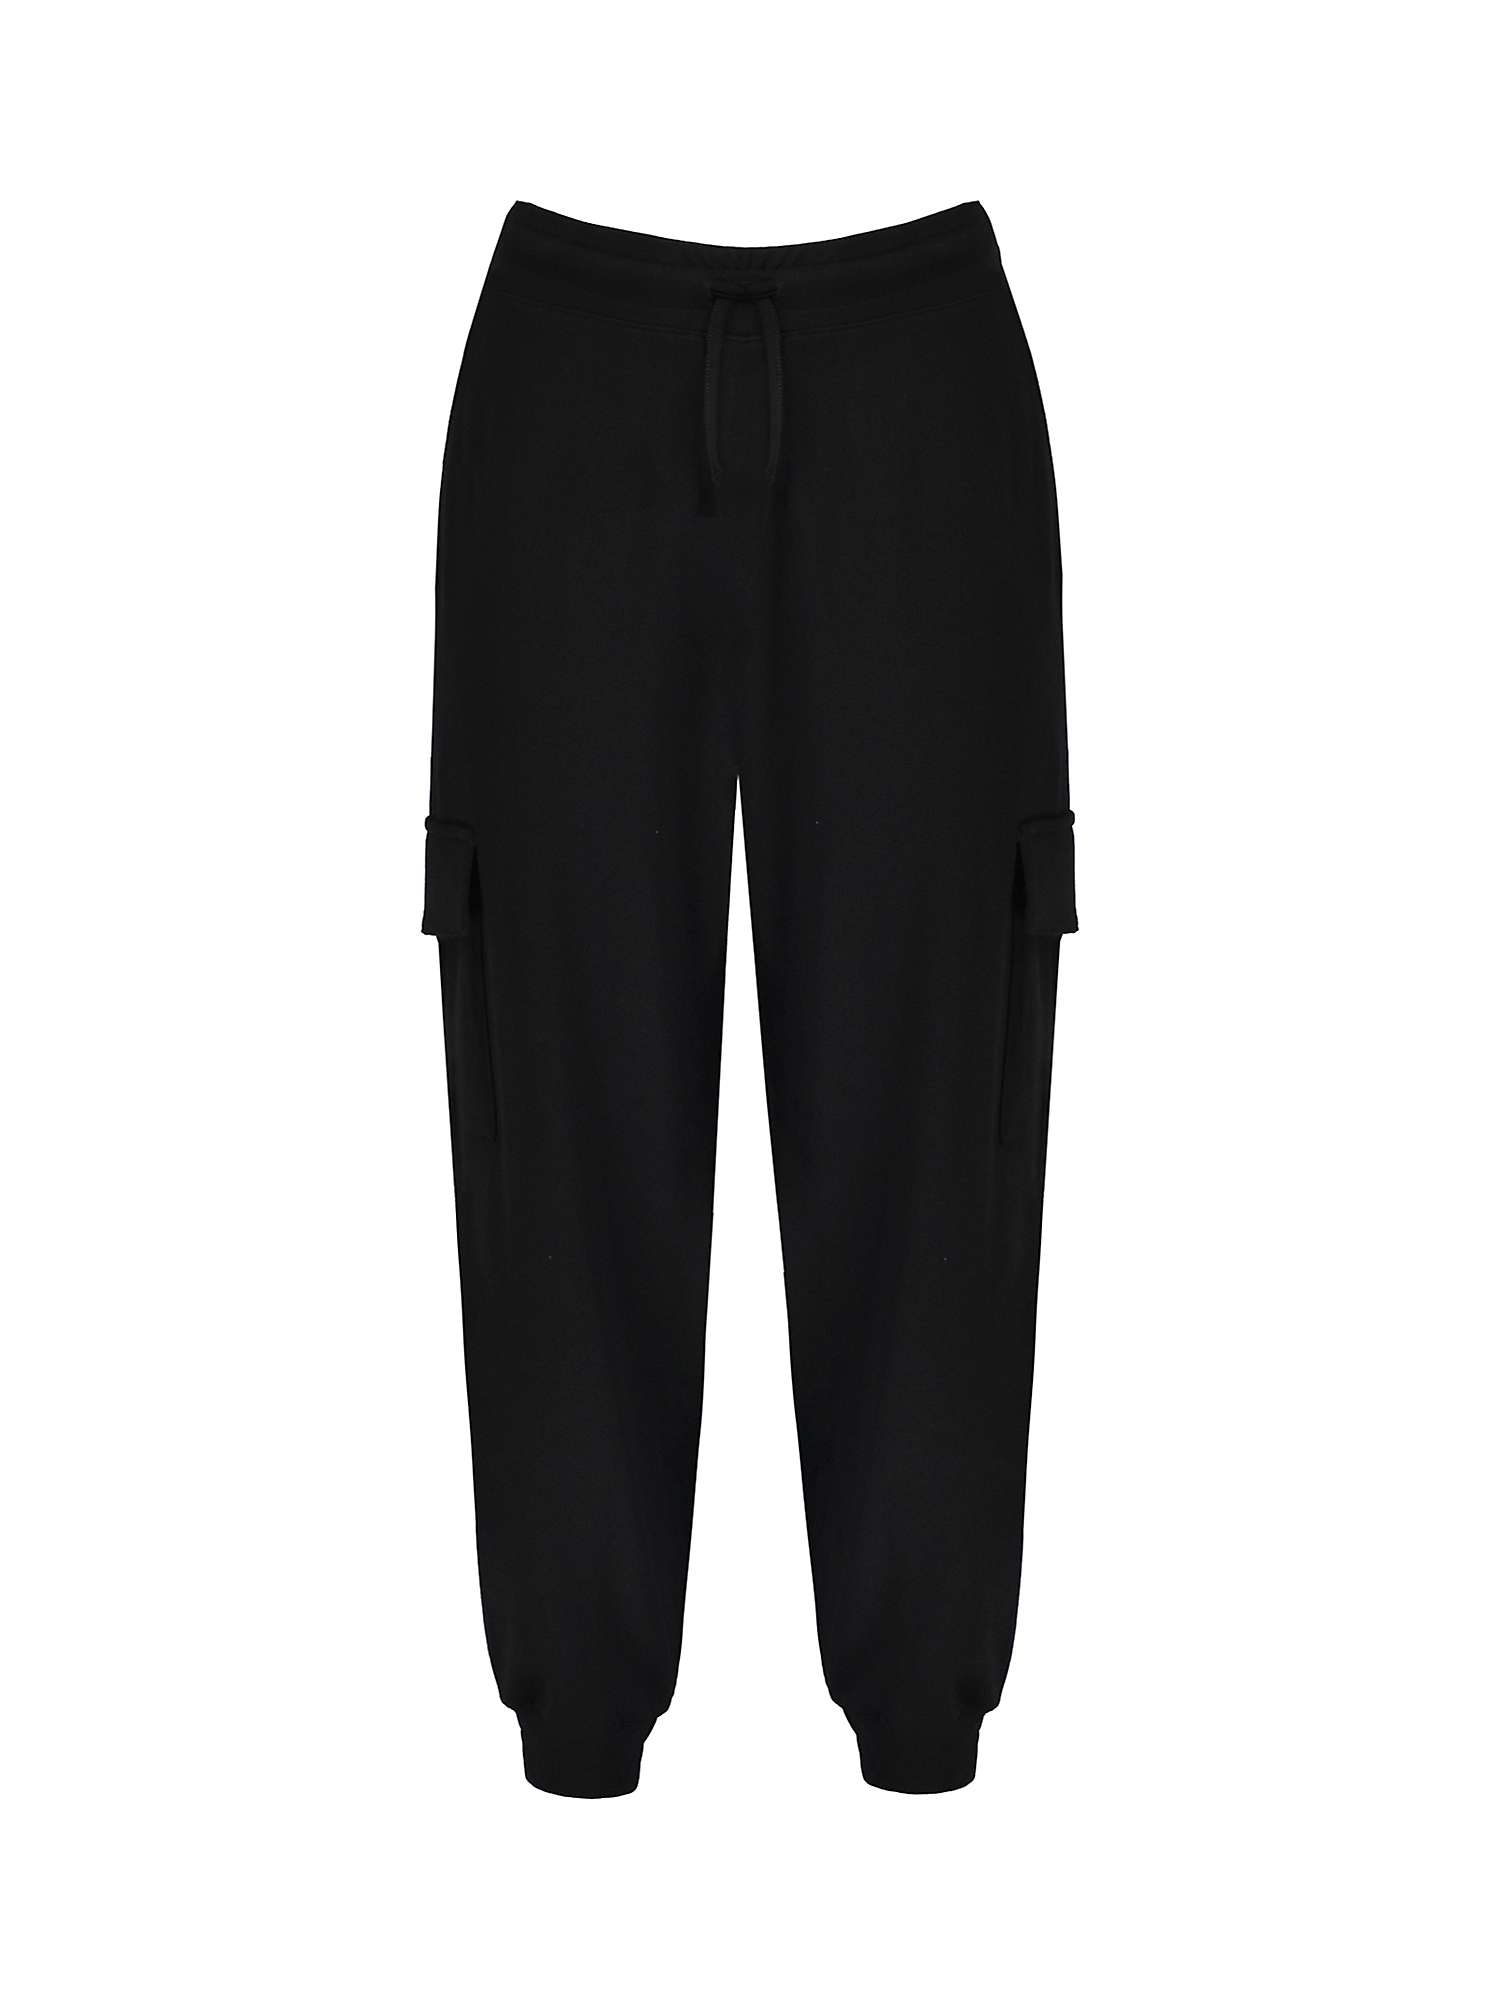 Buy Live Unlimited Curve Petite Jersey Cargo Trousers, Black Online at johnlewis.com